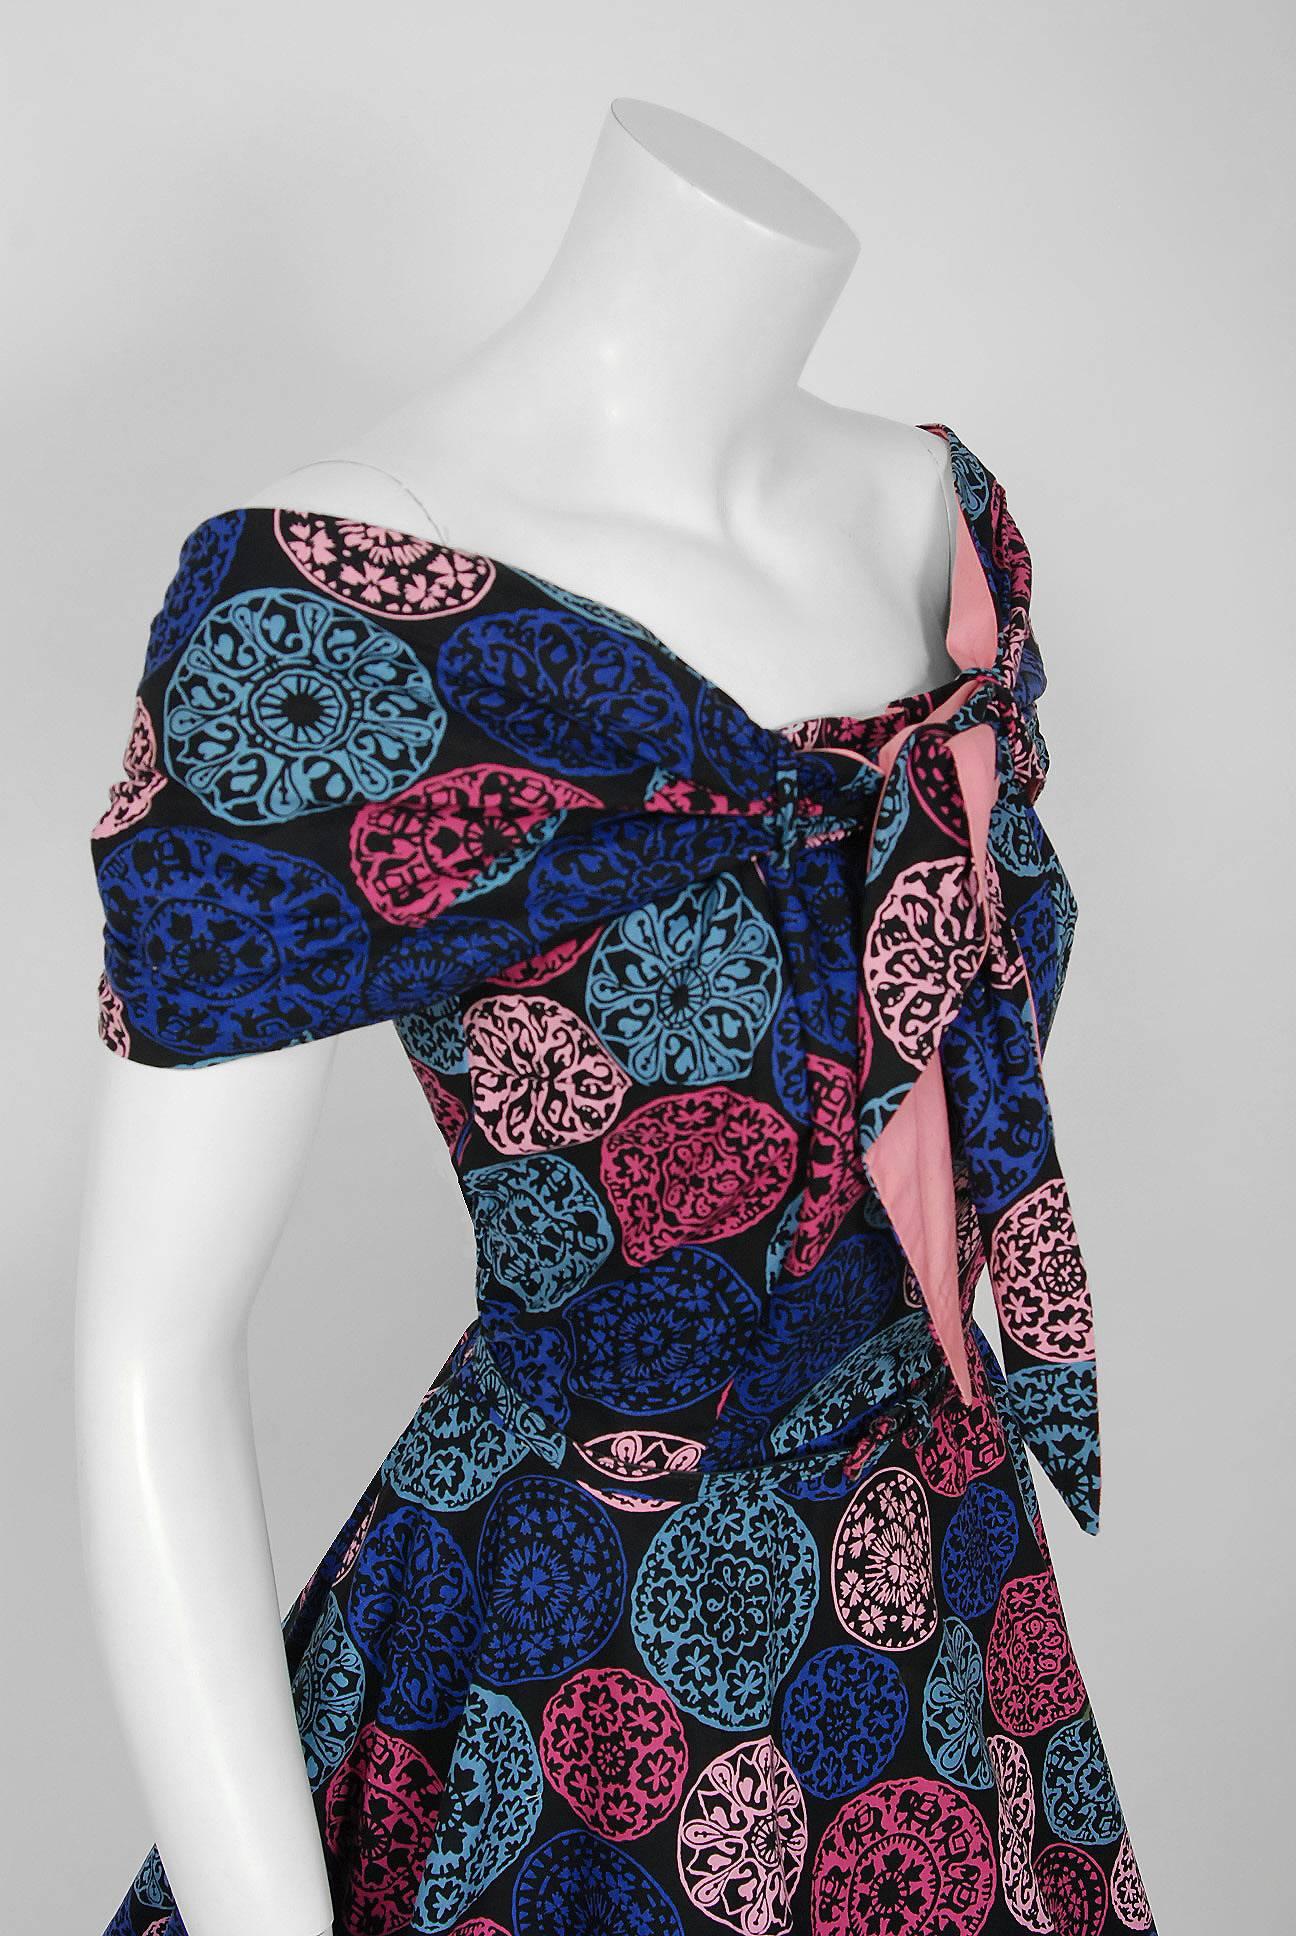 With its vibrant novelty print and flawless 'new look' silhouette, this Toni Hunt designer sundress ensemble has the casual elegance the 1950's were known for. The pattern alone is sensational; large scale dotted medallions in hues of blue, pink